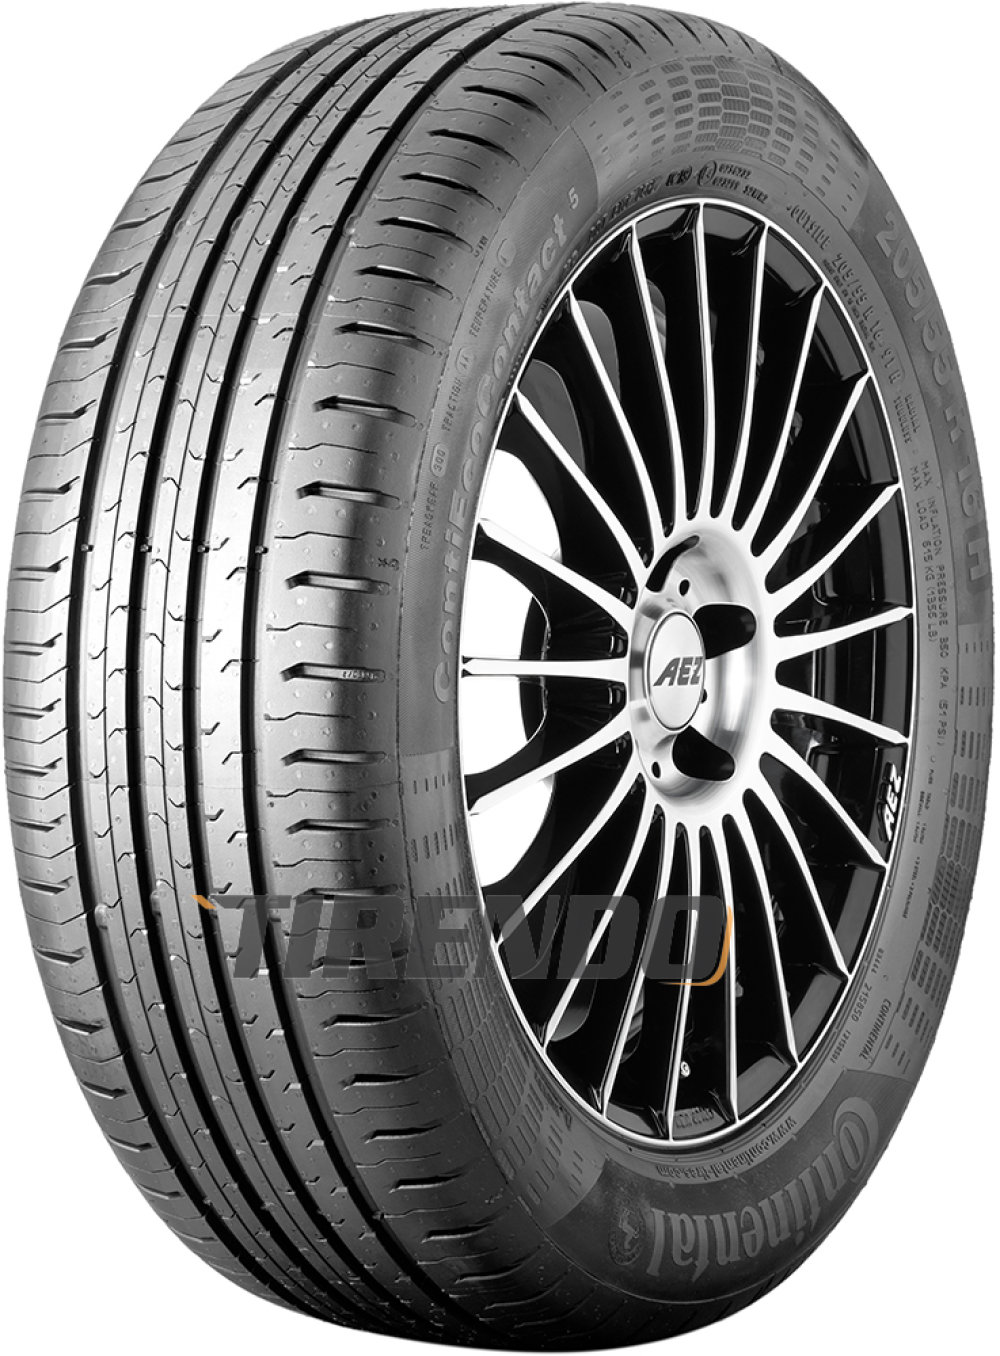 Continental ContiEcoContact 5 ( 165/65 R14 83T XL ) von Continental